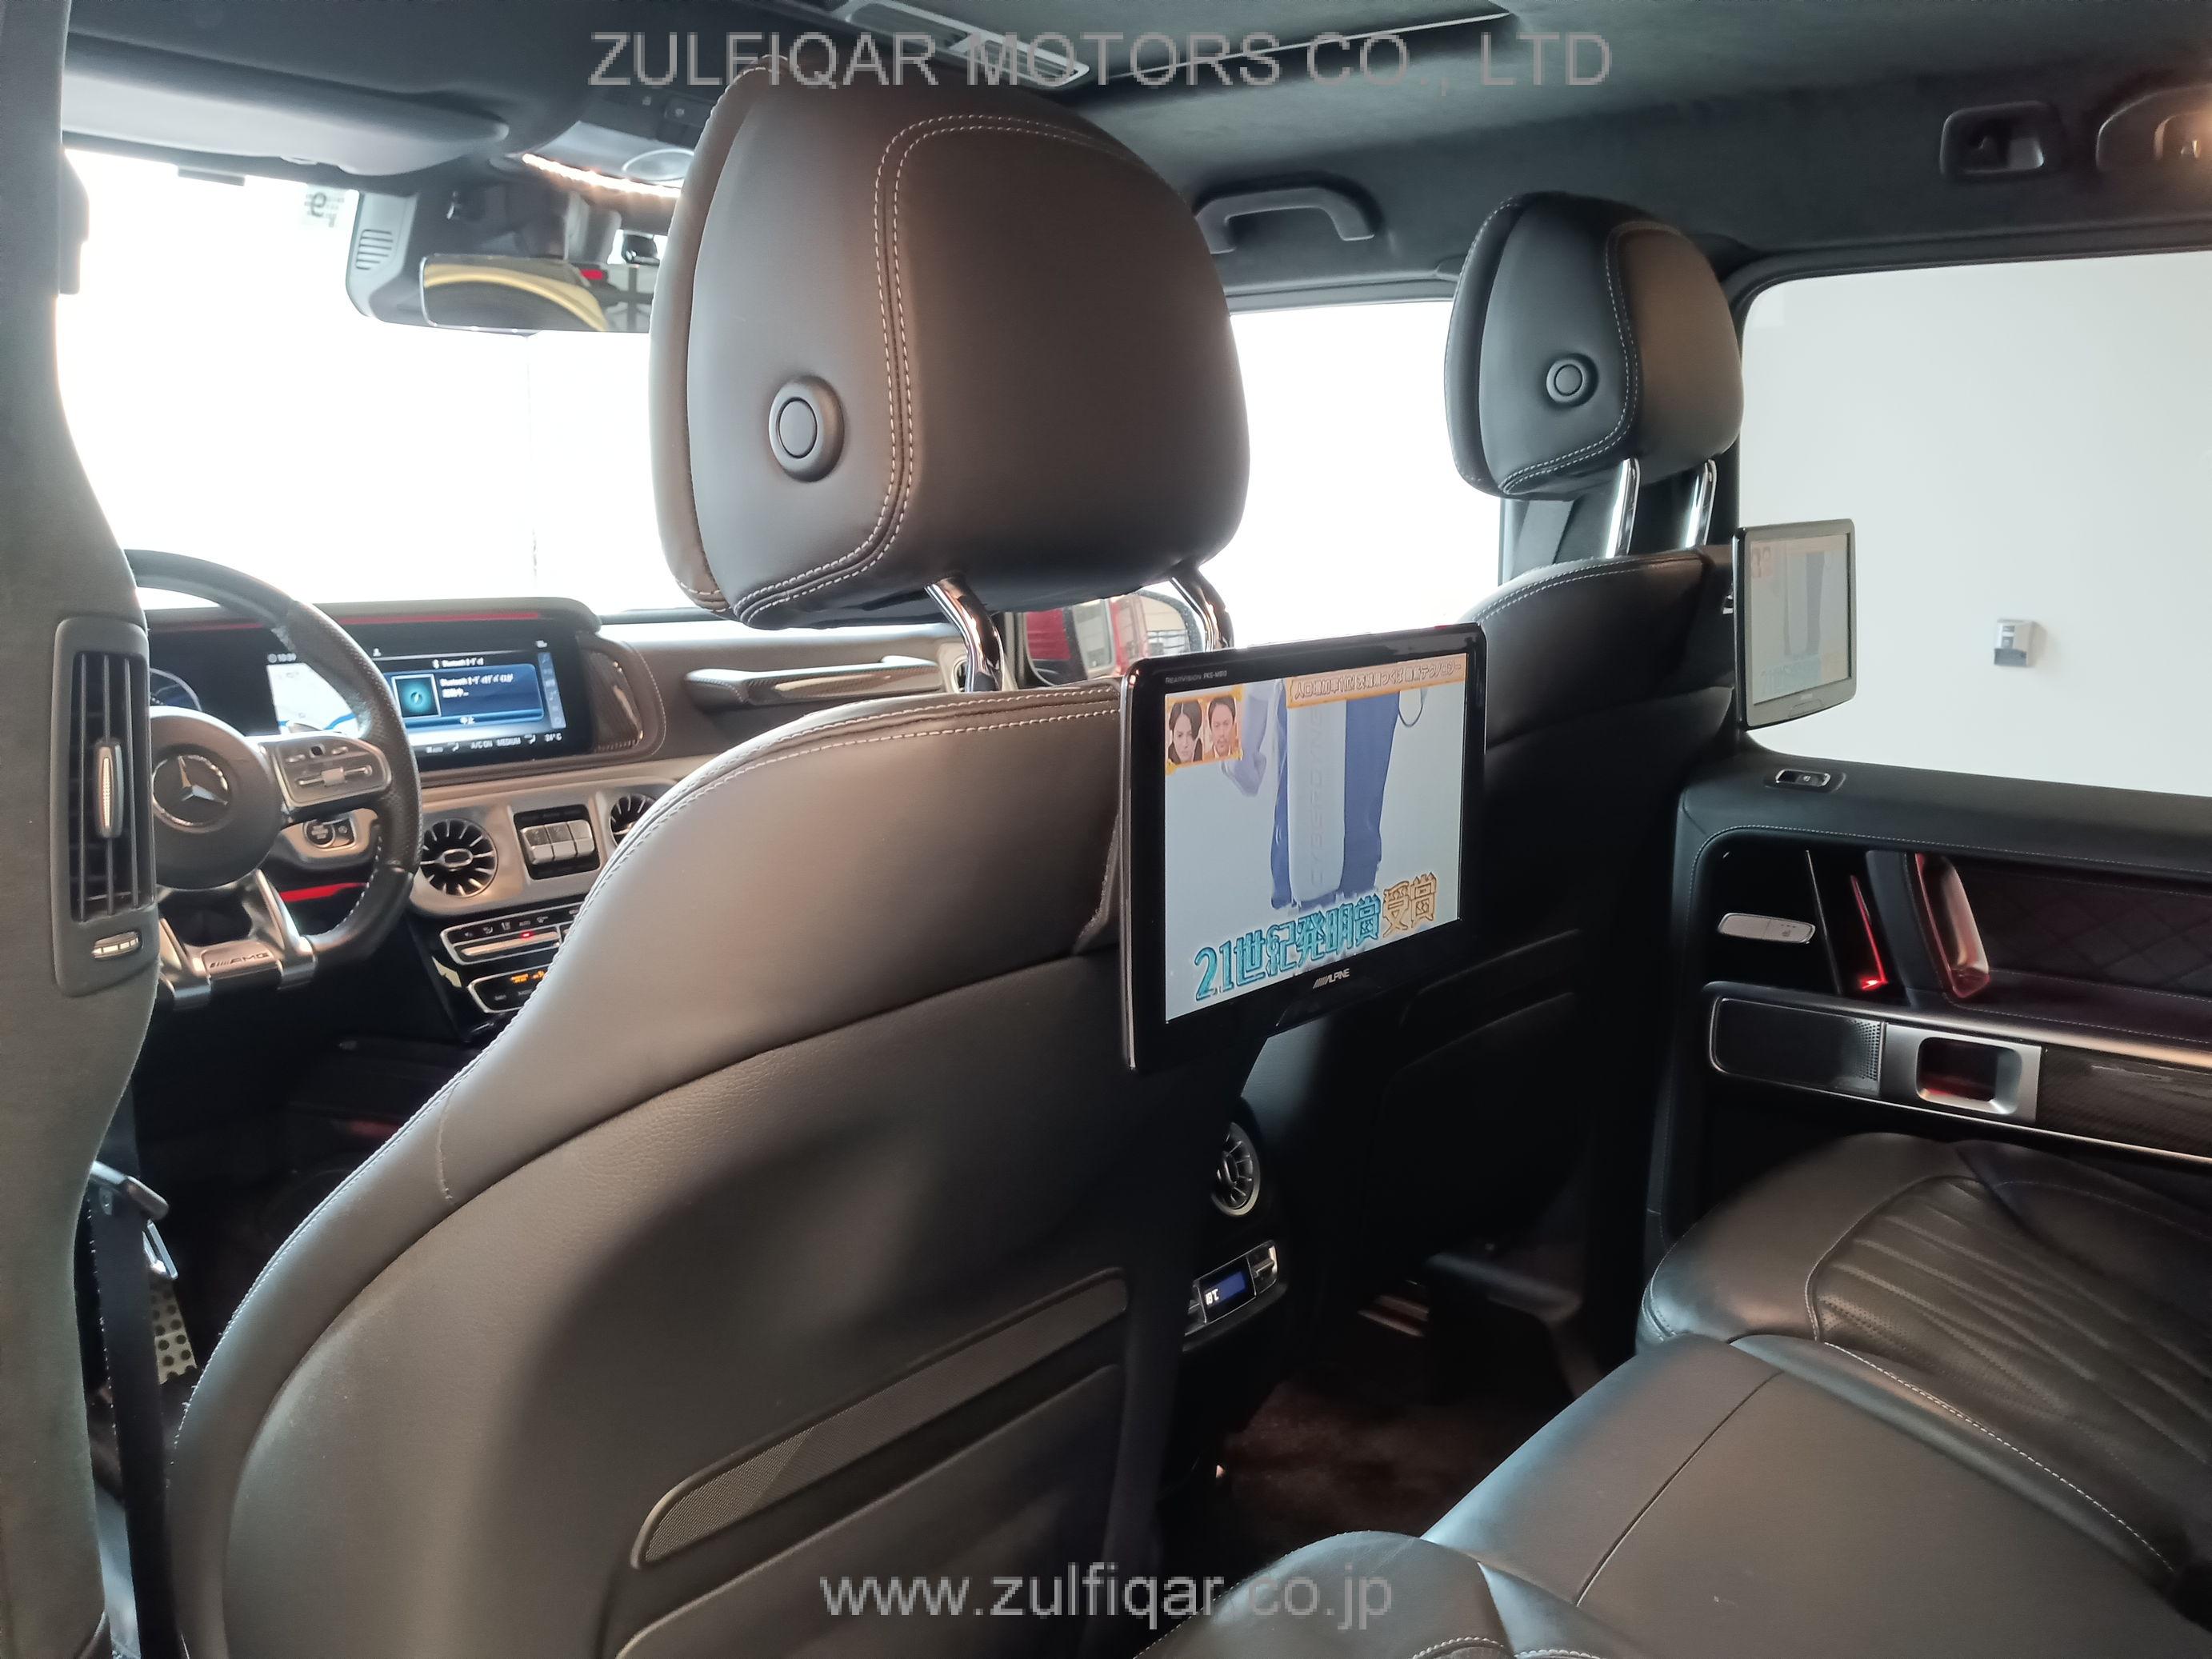 MERCEDES AMG G CLASS 2019 Image 53